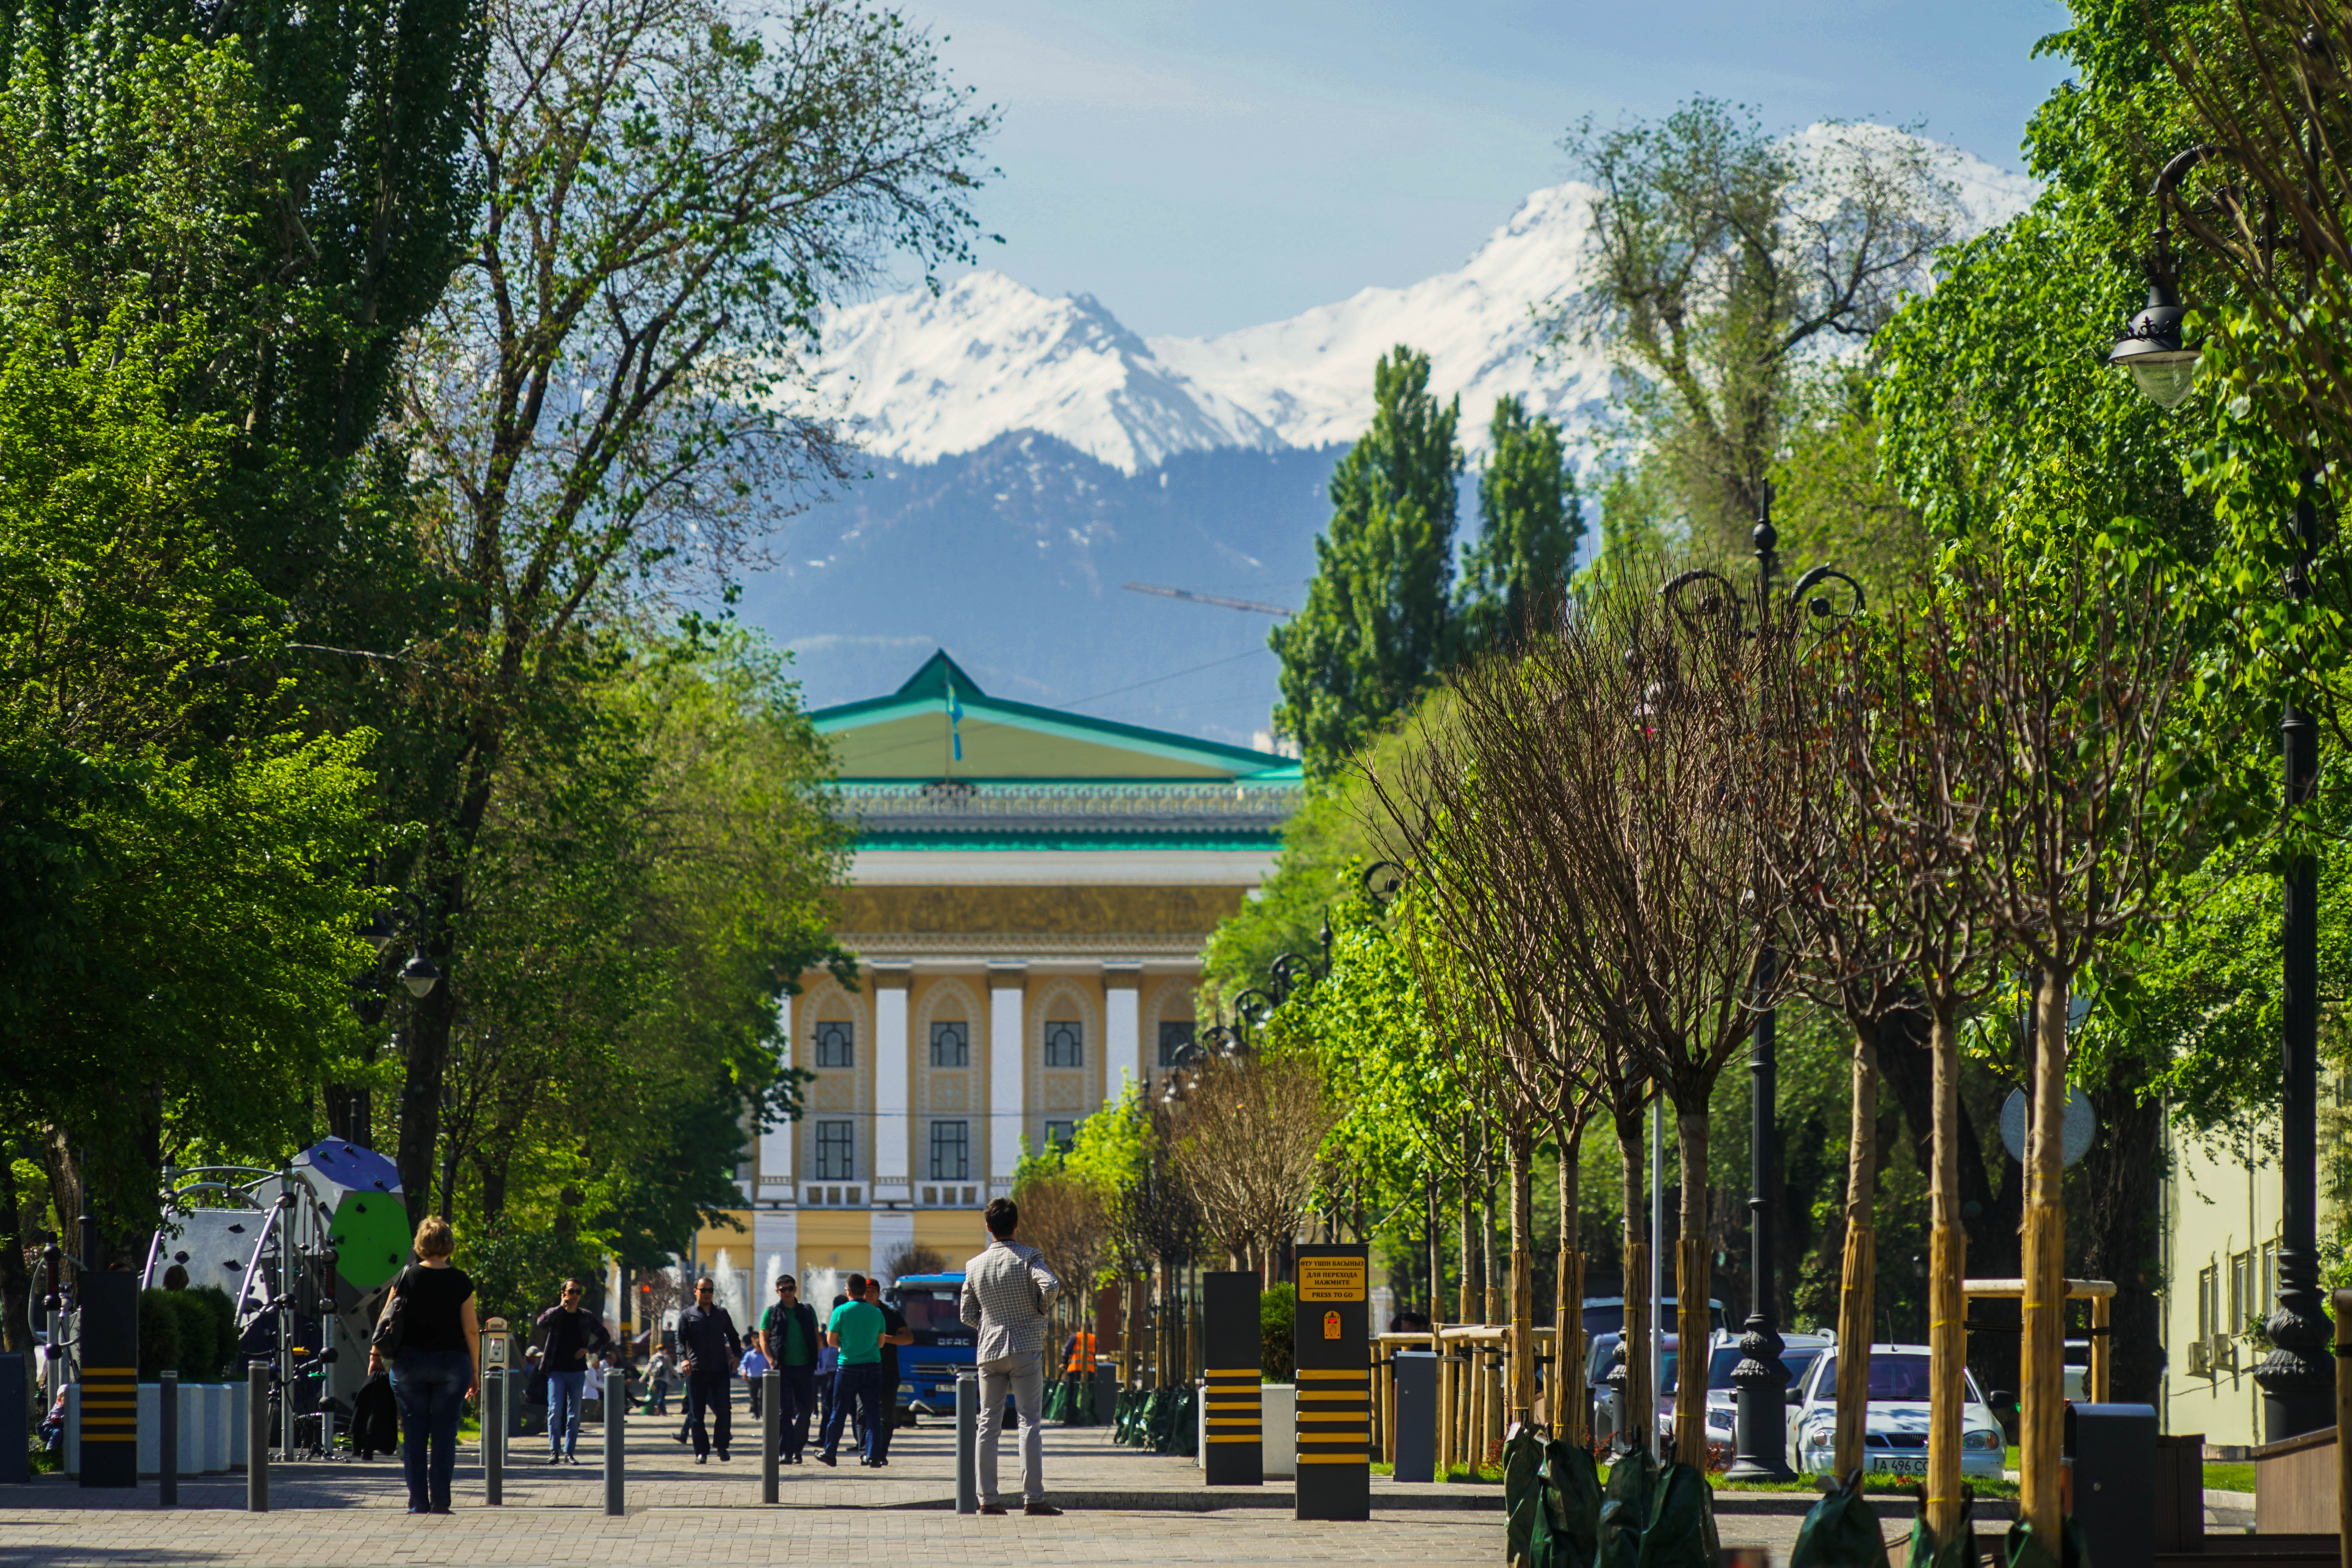 Almaty main walking alley for sightseeing